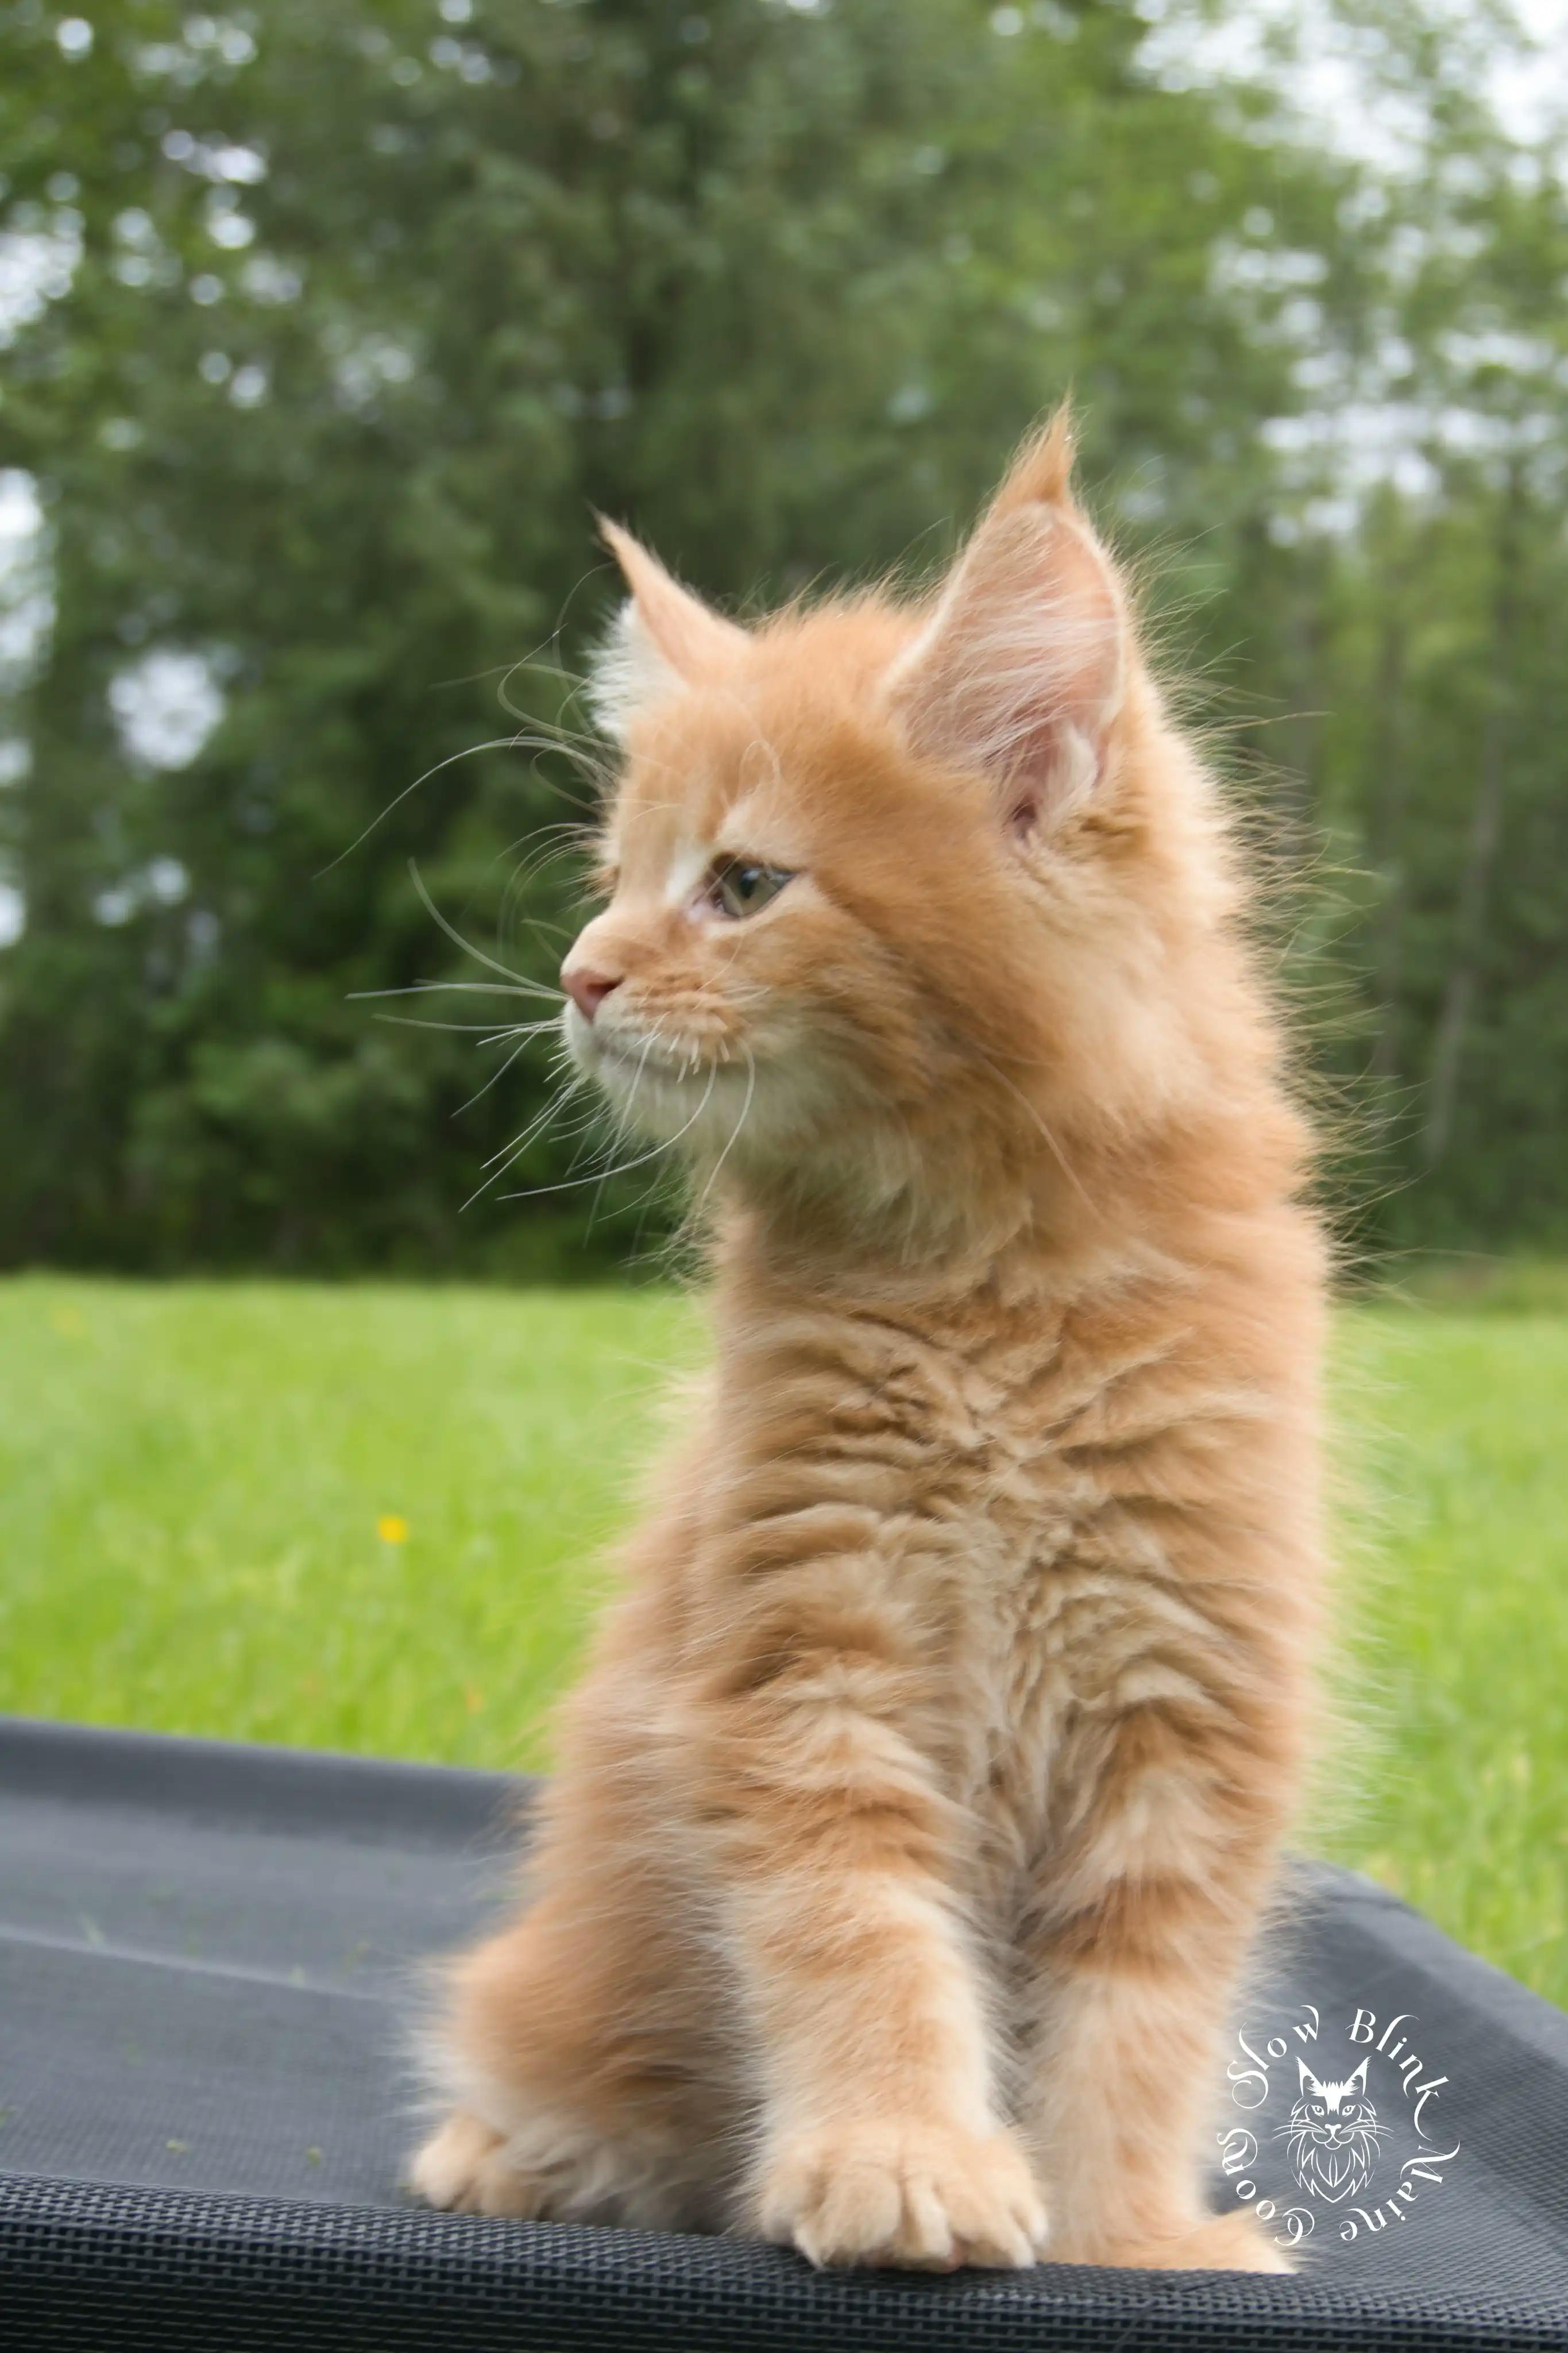 Orange (Red) Maine Coon Kittens > red orange maine coon kitten | slowblinkmainecoons | ems code d ds ds 22 1 17